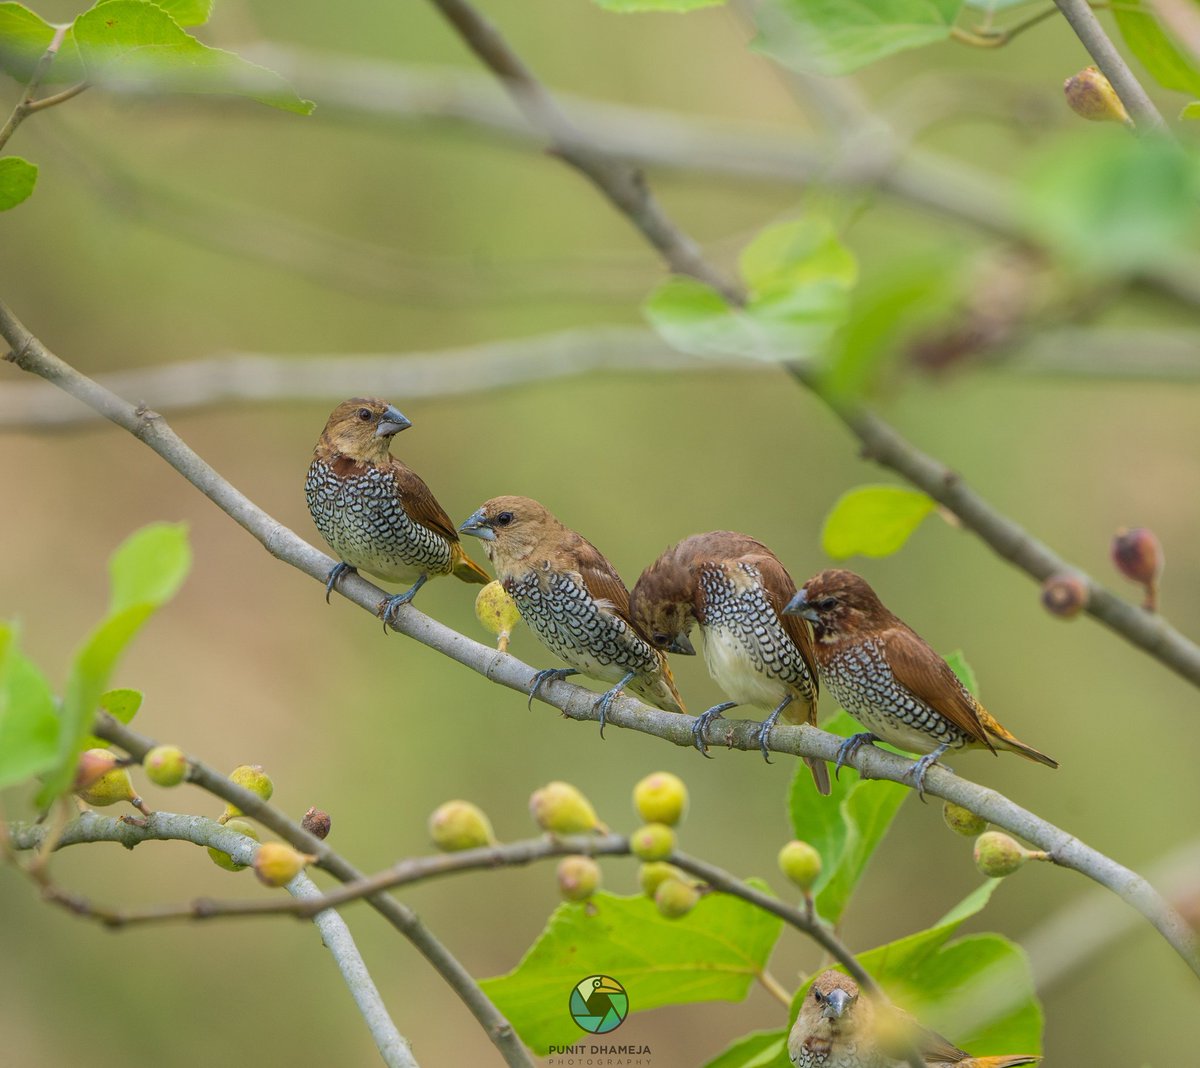 Nothing more satisfying than watching a bunch of Scaly-breasted Munia preening together on a branch.
#IndiAves
#birdwatching 
#BirdsInHabitat 
#ThePhotoHour 
#BirdsSeenIn2023 
#wildlifephotography 
#NaturePhotography